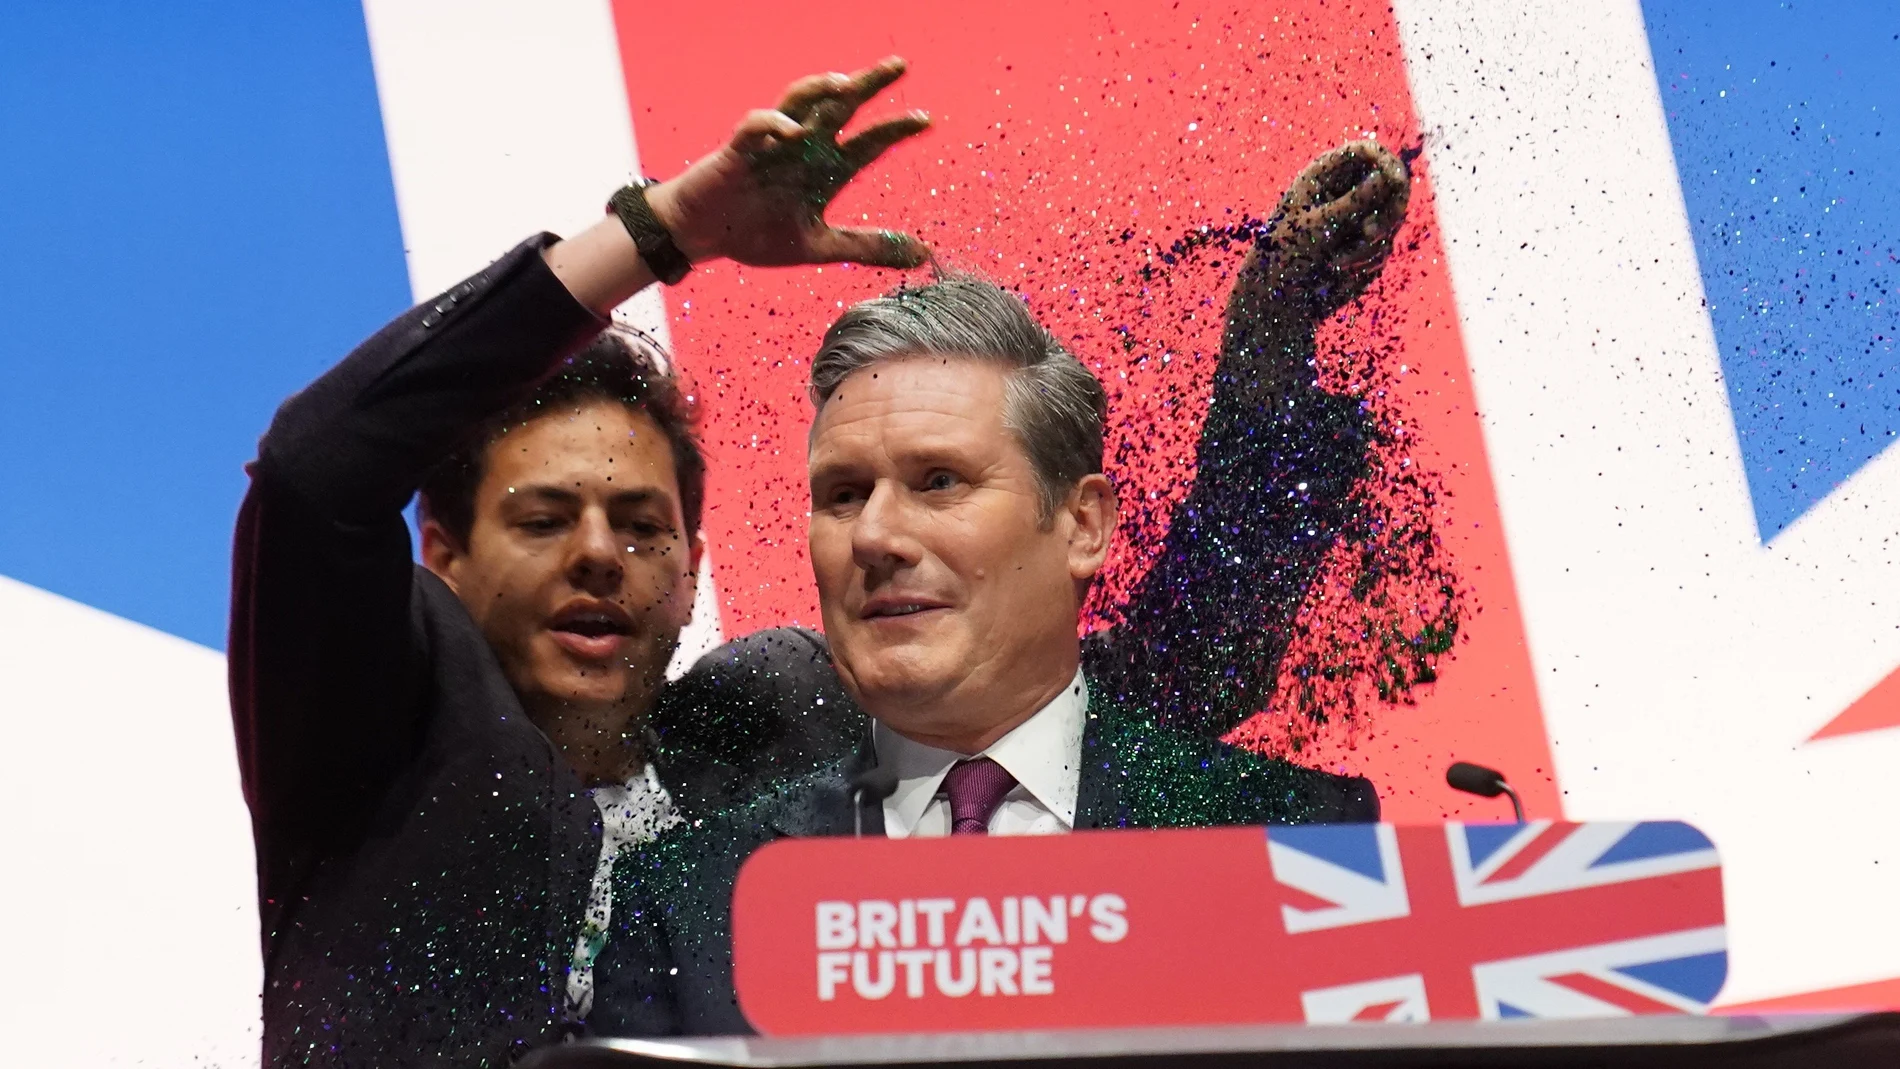 A protester throws glitter over and disrupts (L) British Labour leader Keir Starmer during his keynote speech at the Labour Party Conference in Liverpool.